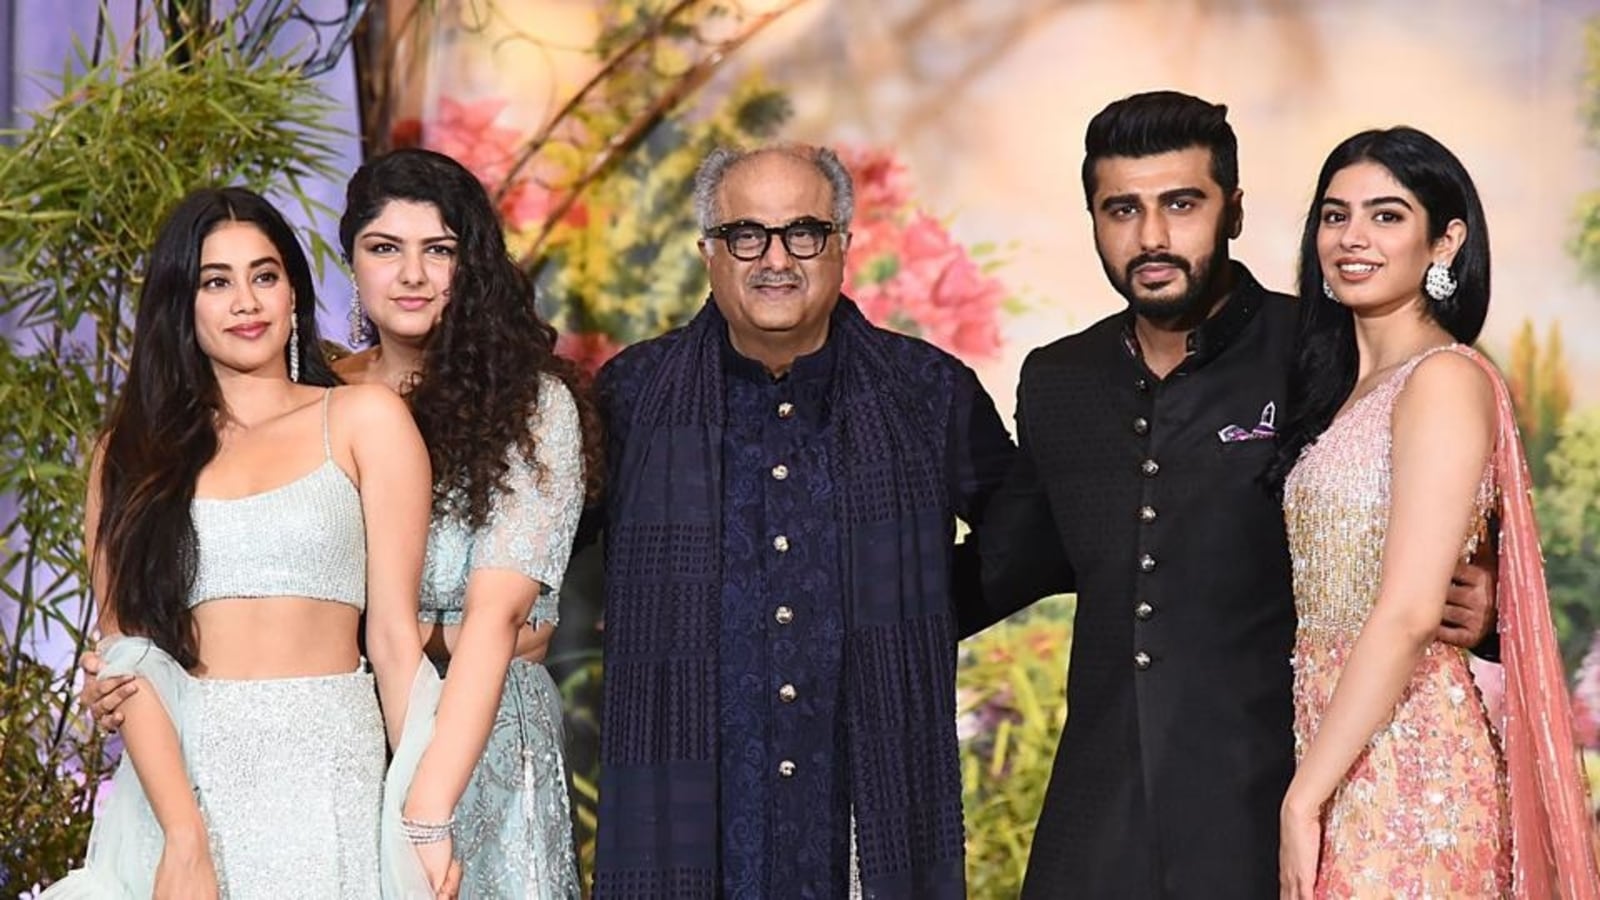 Arjun Kapoor says he can't be 'okay' with dad Boney leaving his mom for  Sridevi, but can 'understand' it | Bollywood - Hindustan Times